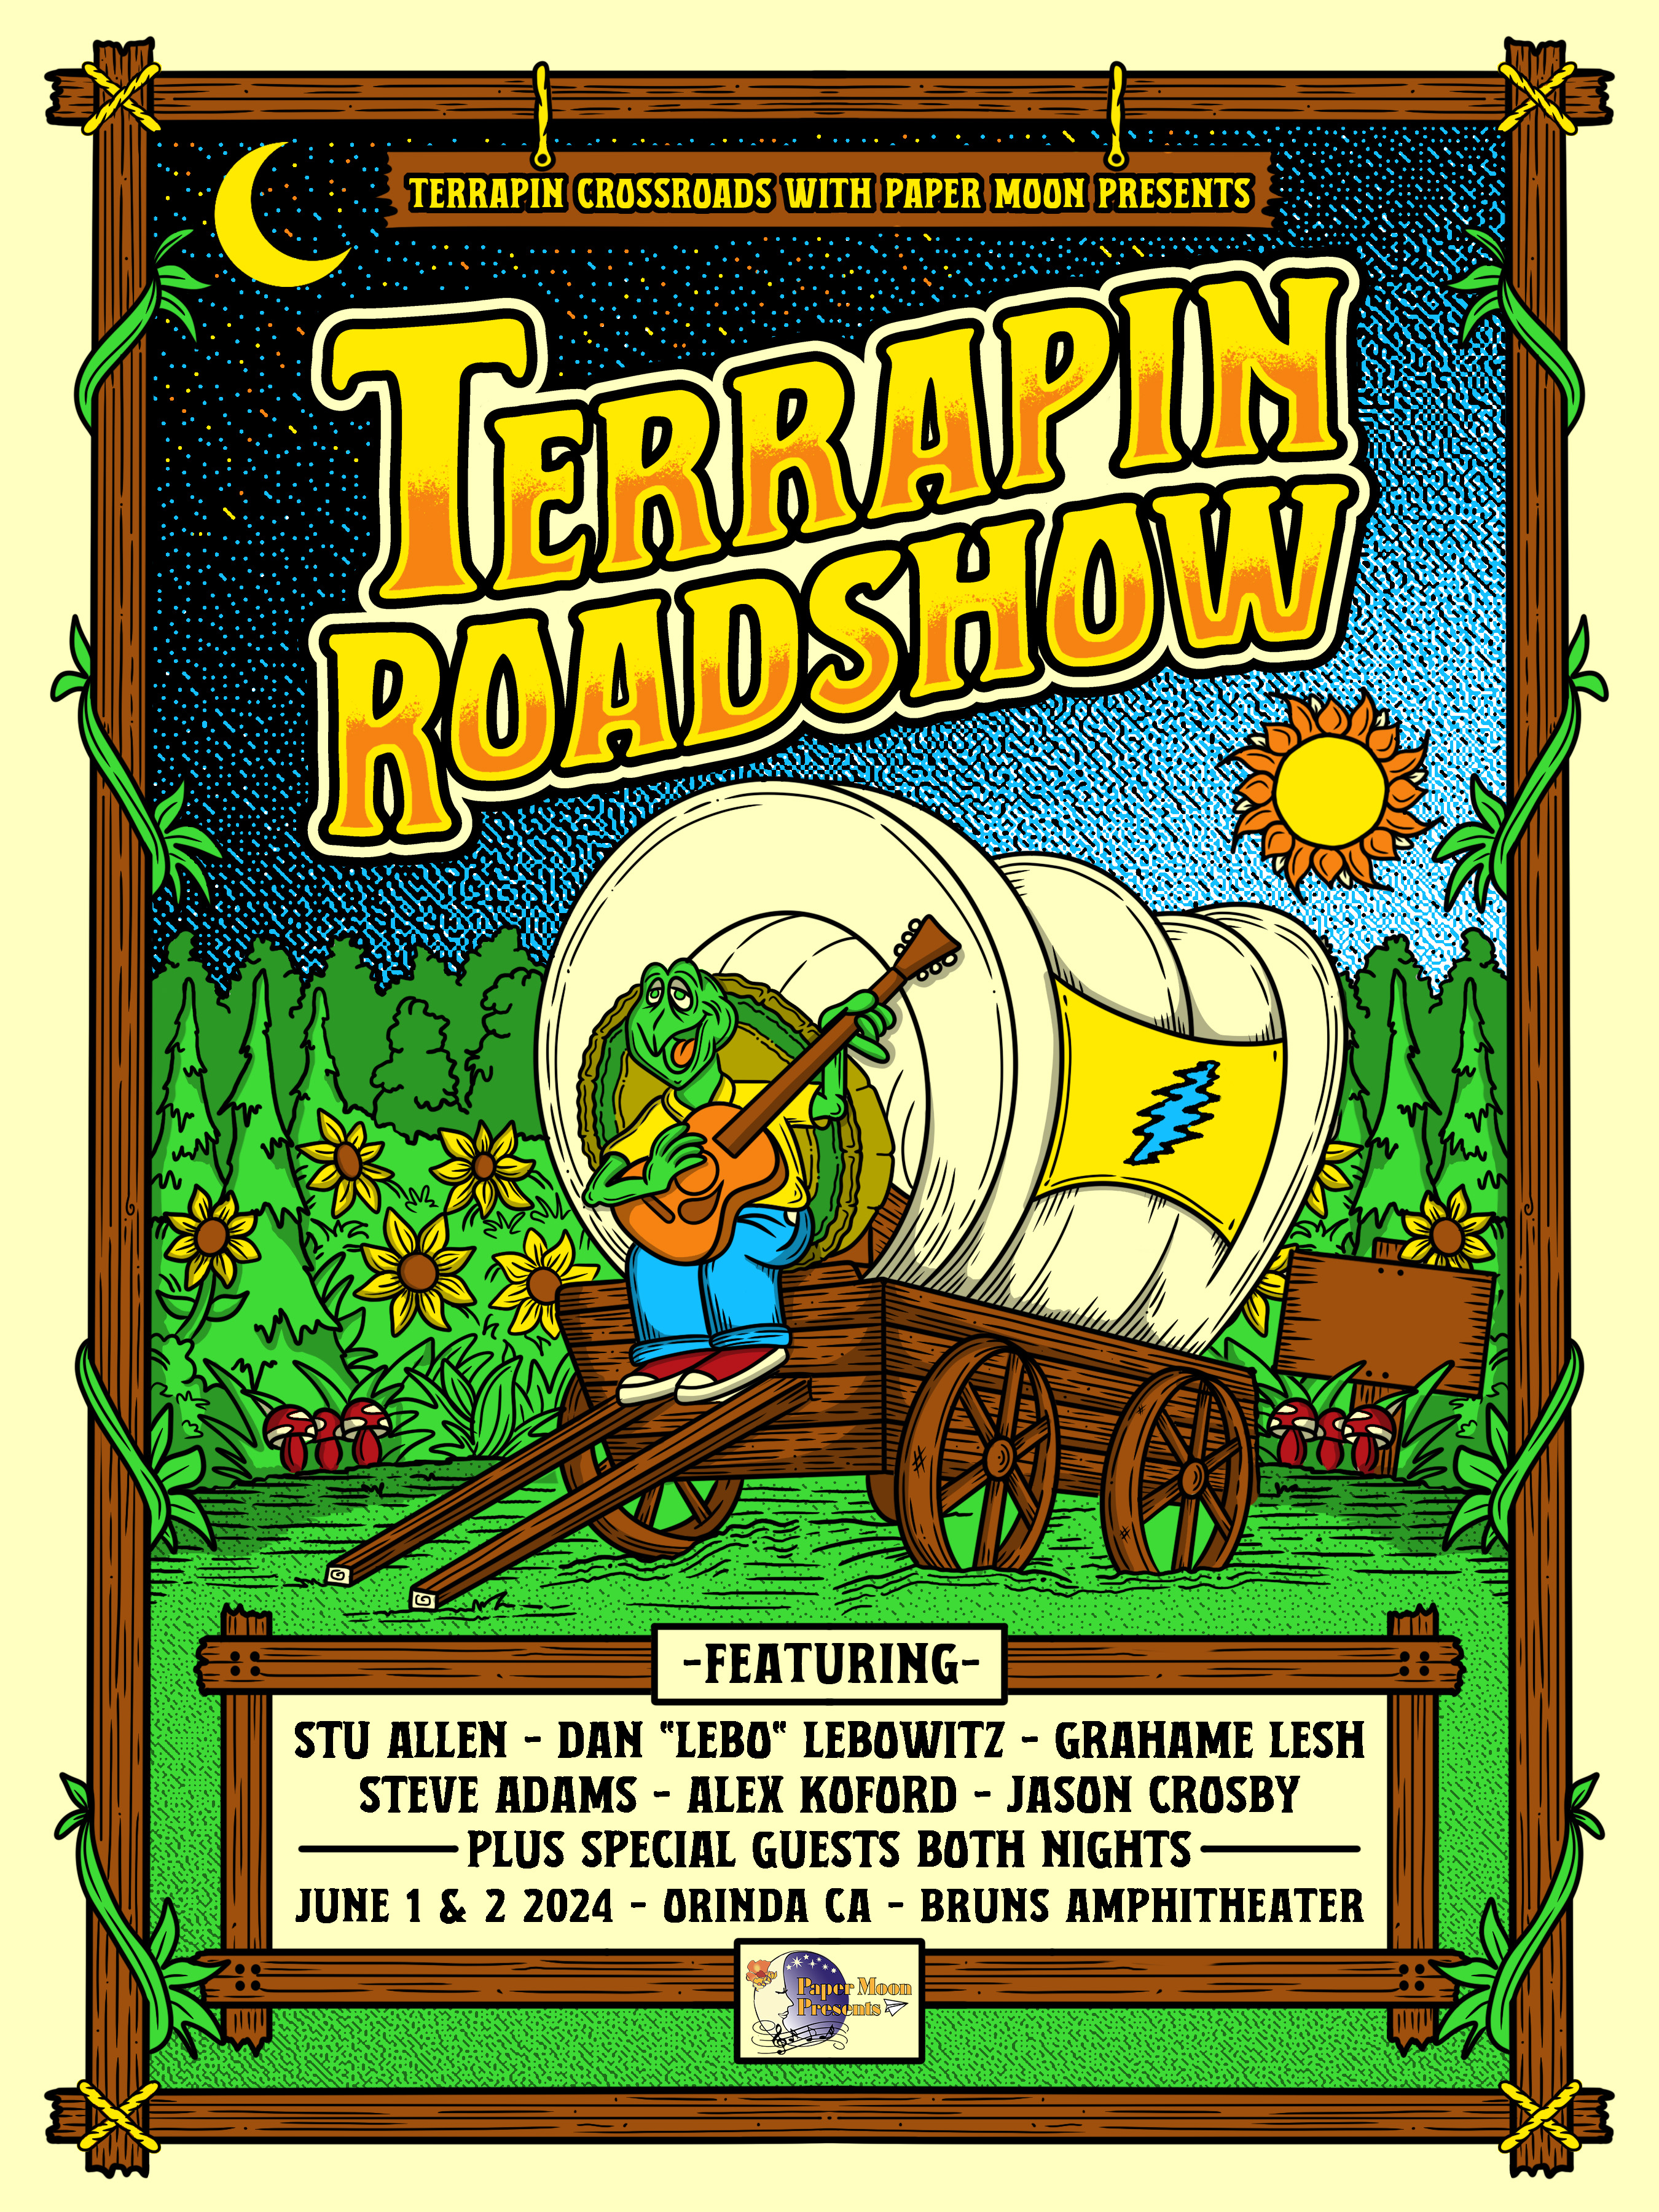 Terrapin Crossroads Announces Lineup for ‘Terrapin Roadshow’ on June 1st and 2nd!